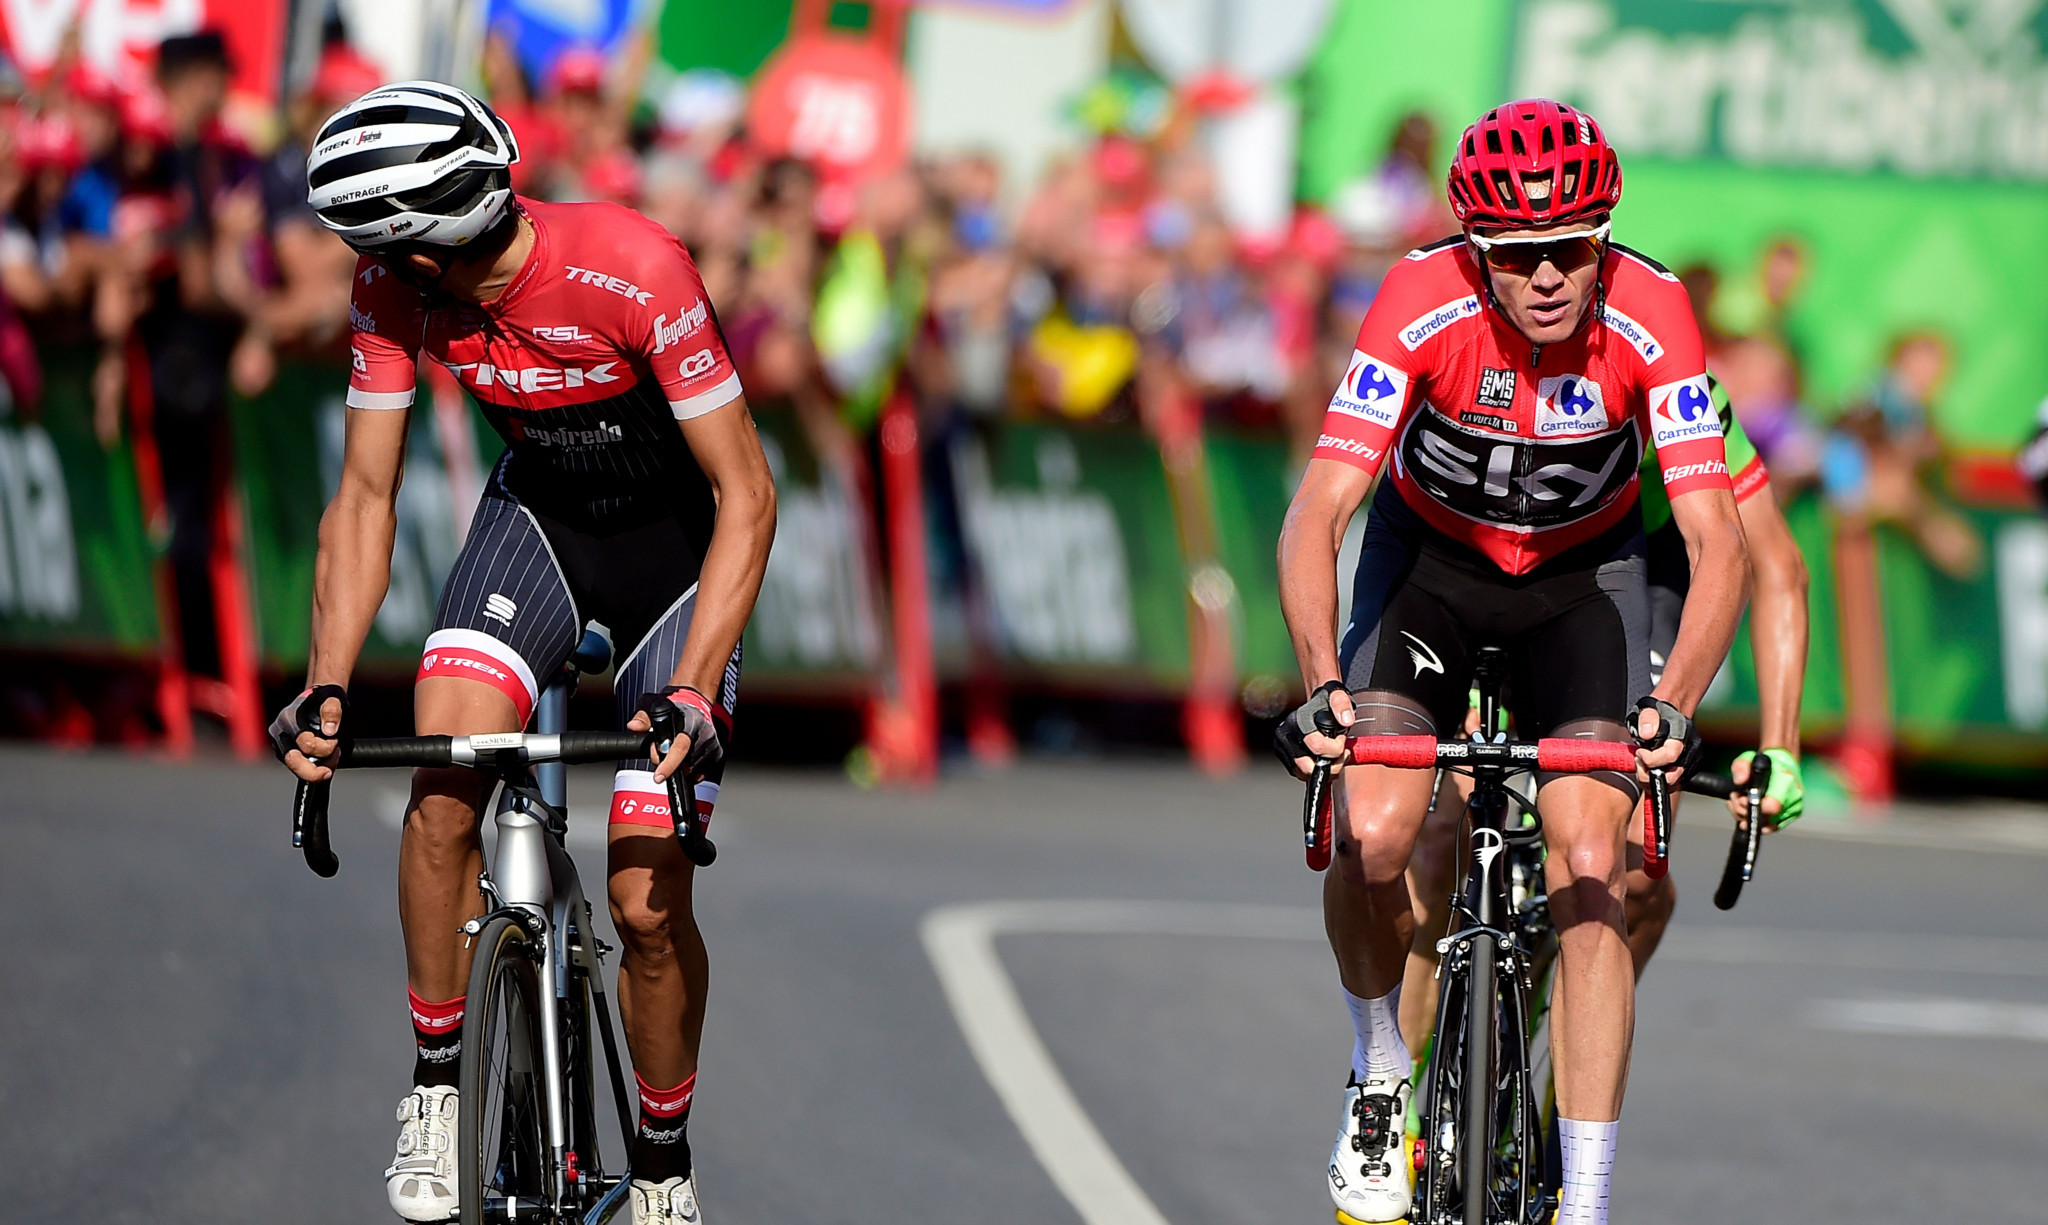 Chris Froome, right, gained 21 seconds on his nearest rival Vincenzo Nibali ©Getty Images